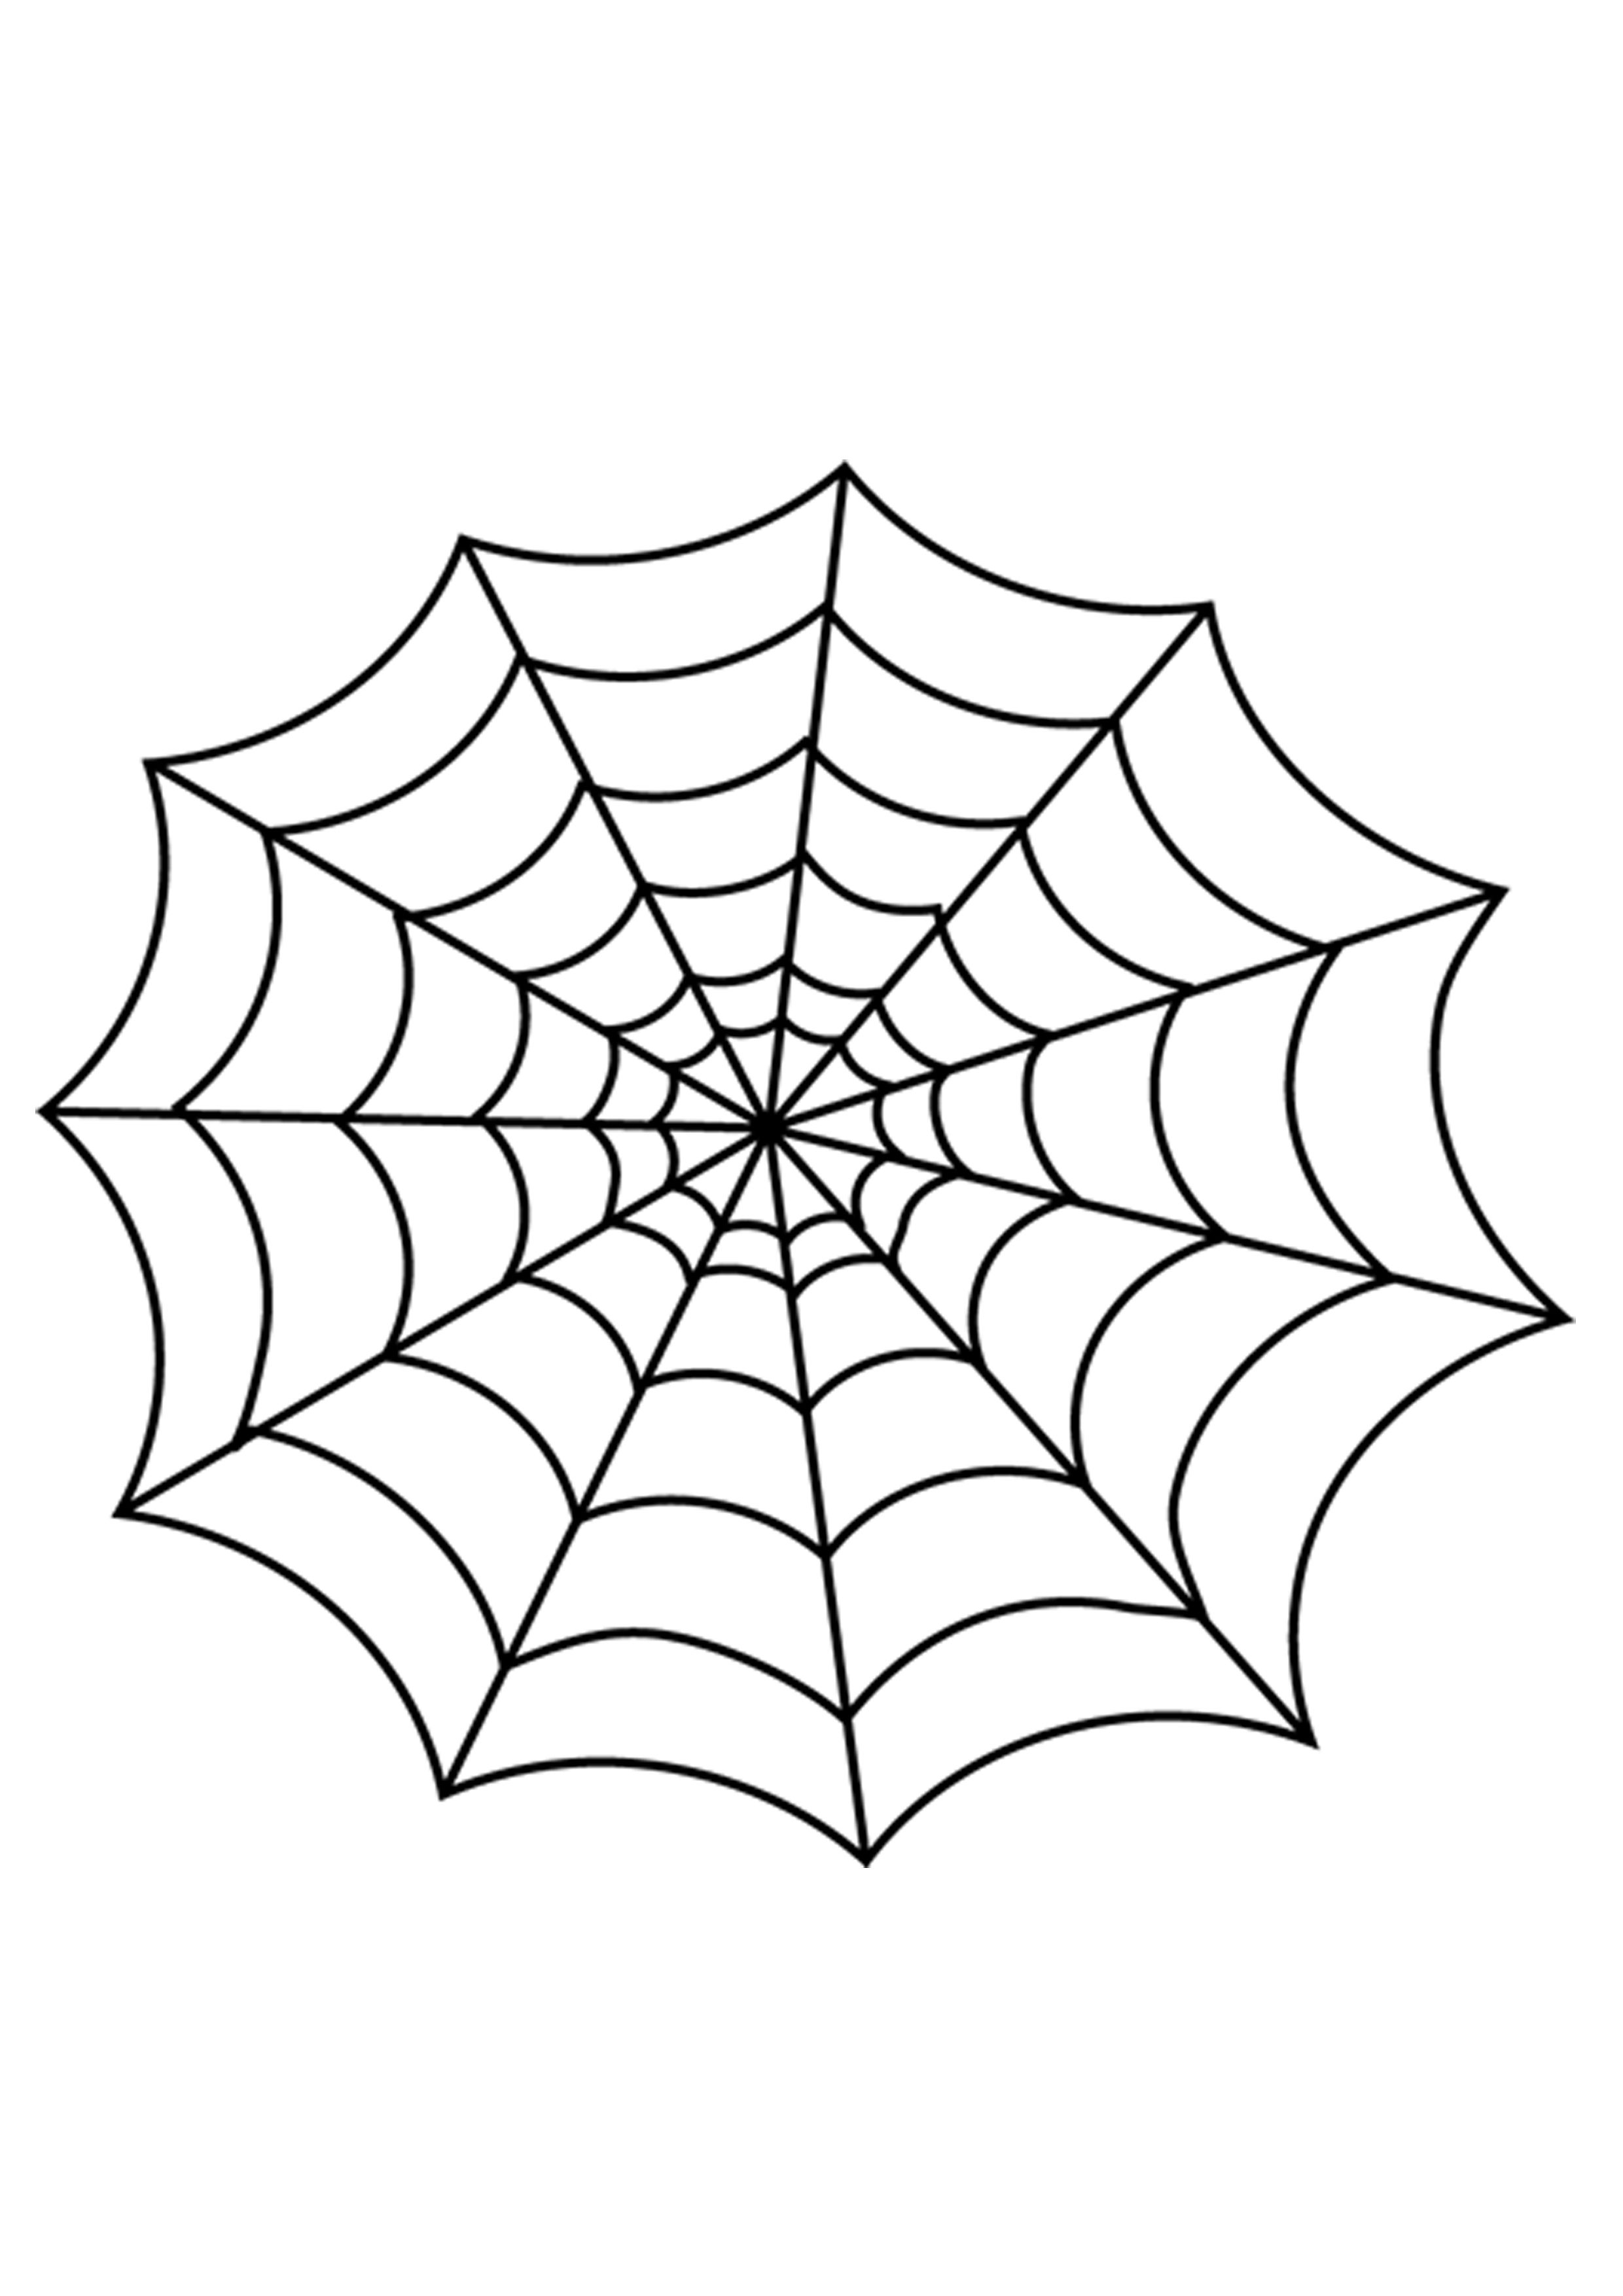 14 Decoration Drawing Halloween For Free Download On Ayoqq - Spider Web Stencil Free Printable